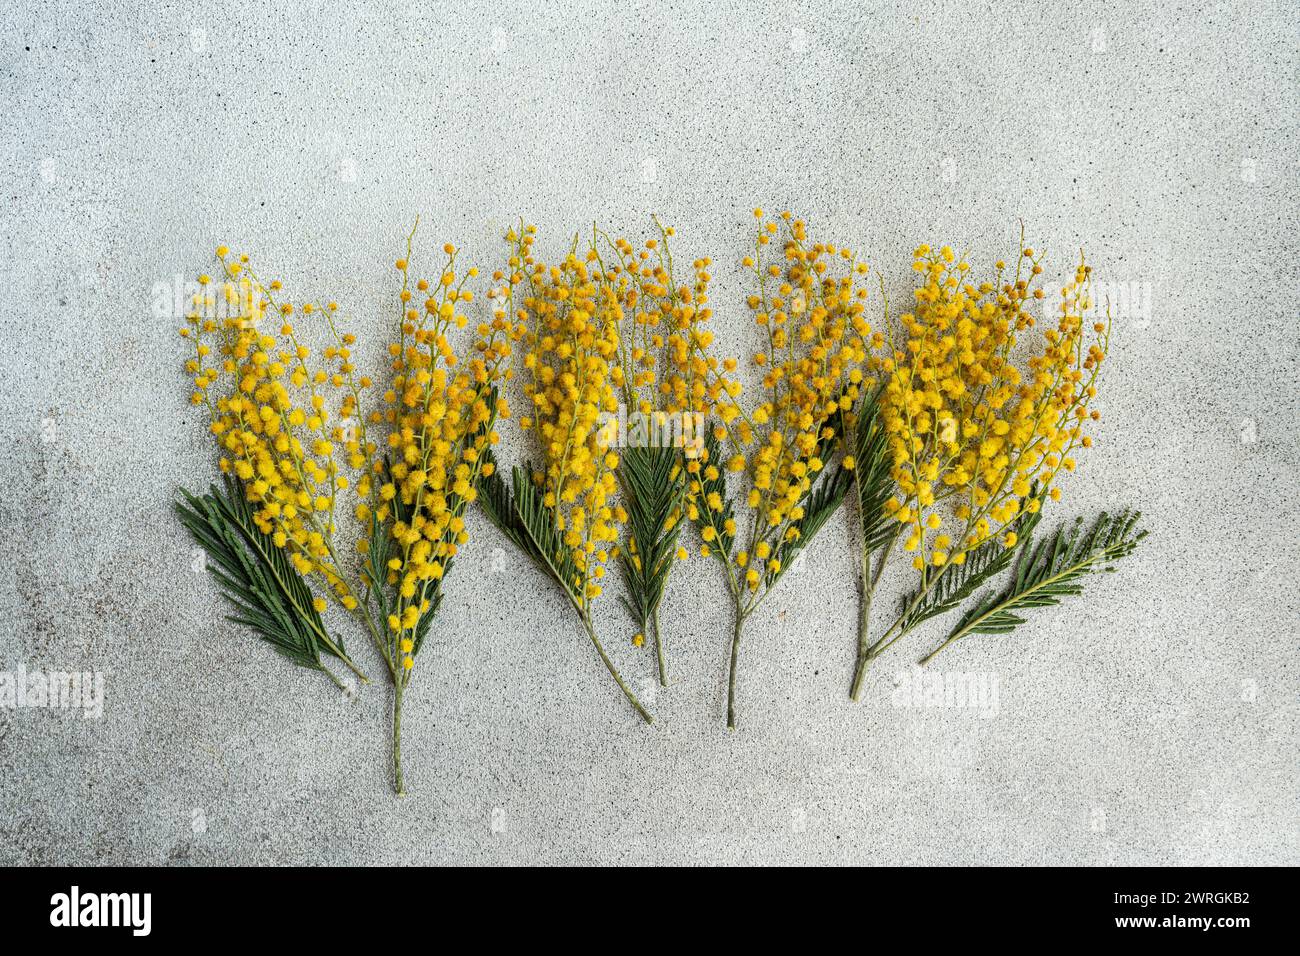 Overhead view of stems of yellow mimosa flowers lying side by side on a table Stock Photo